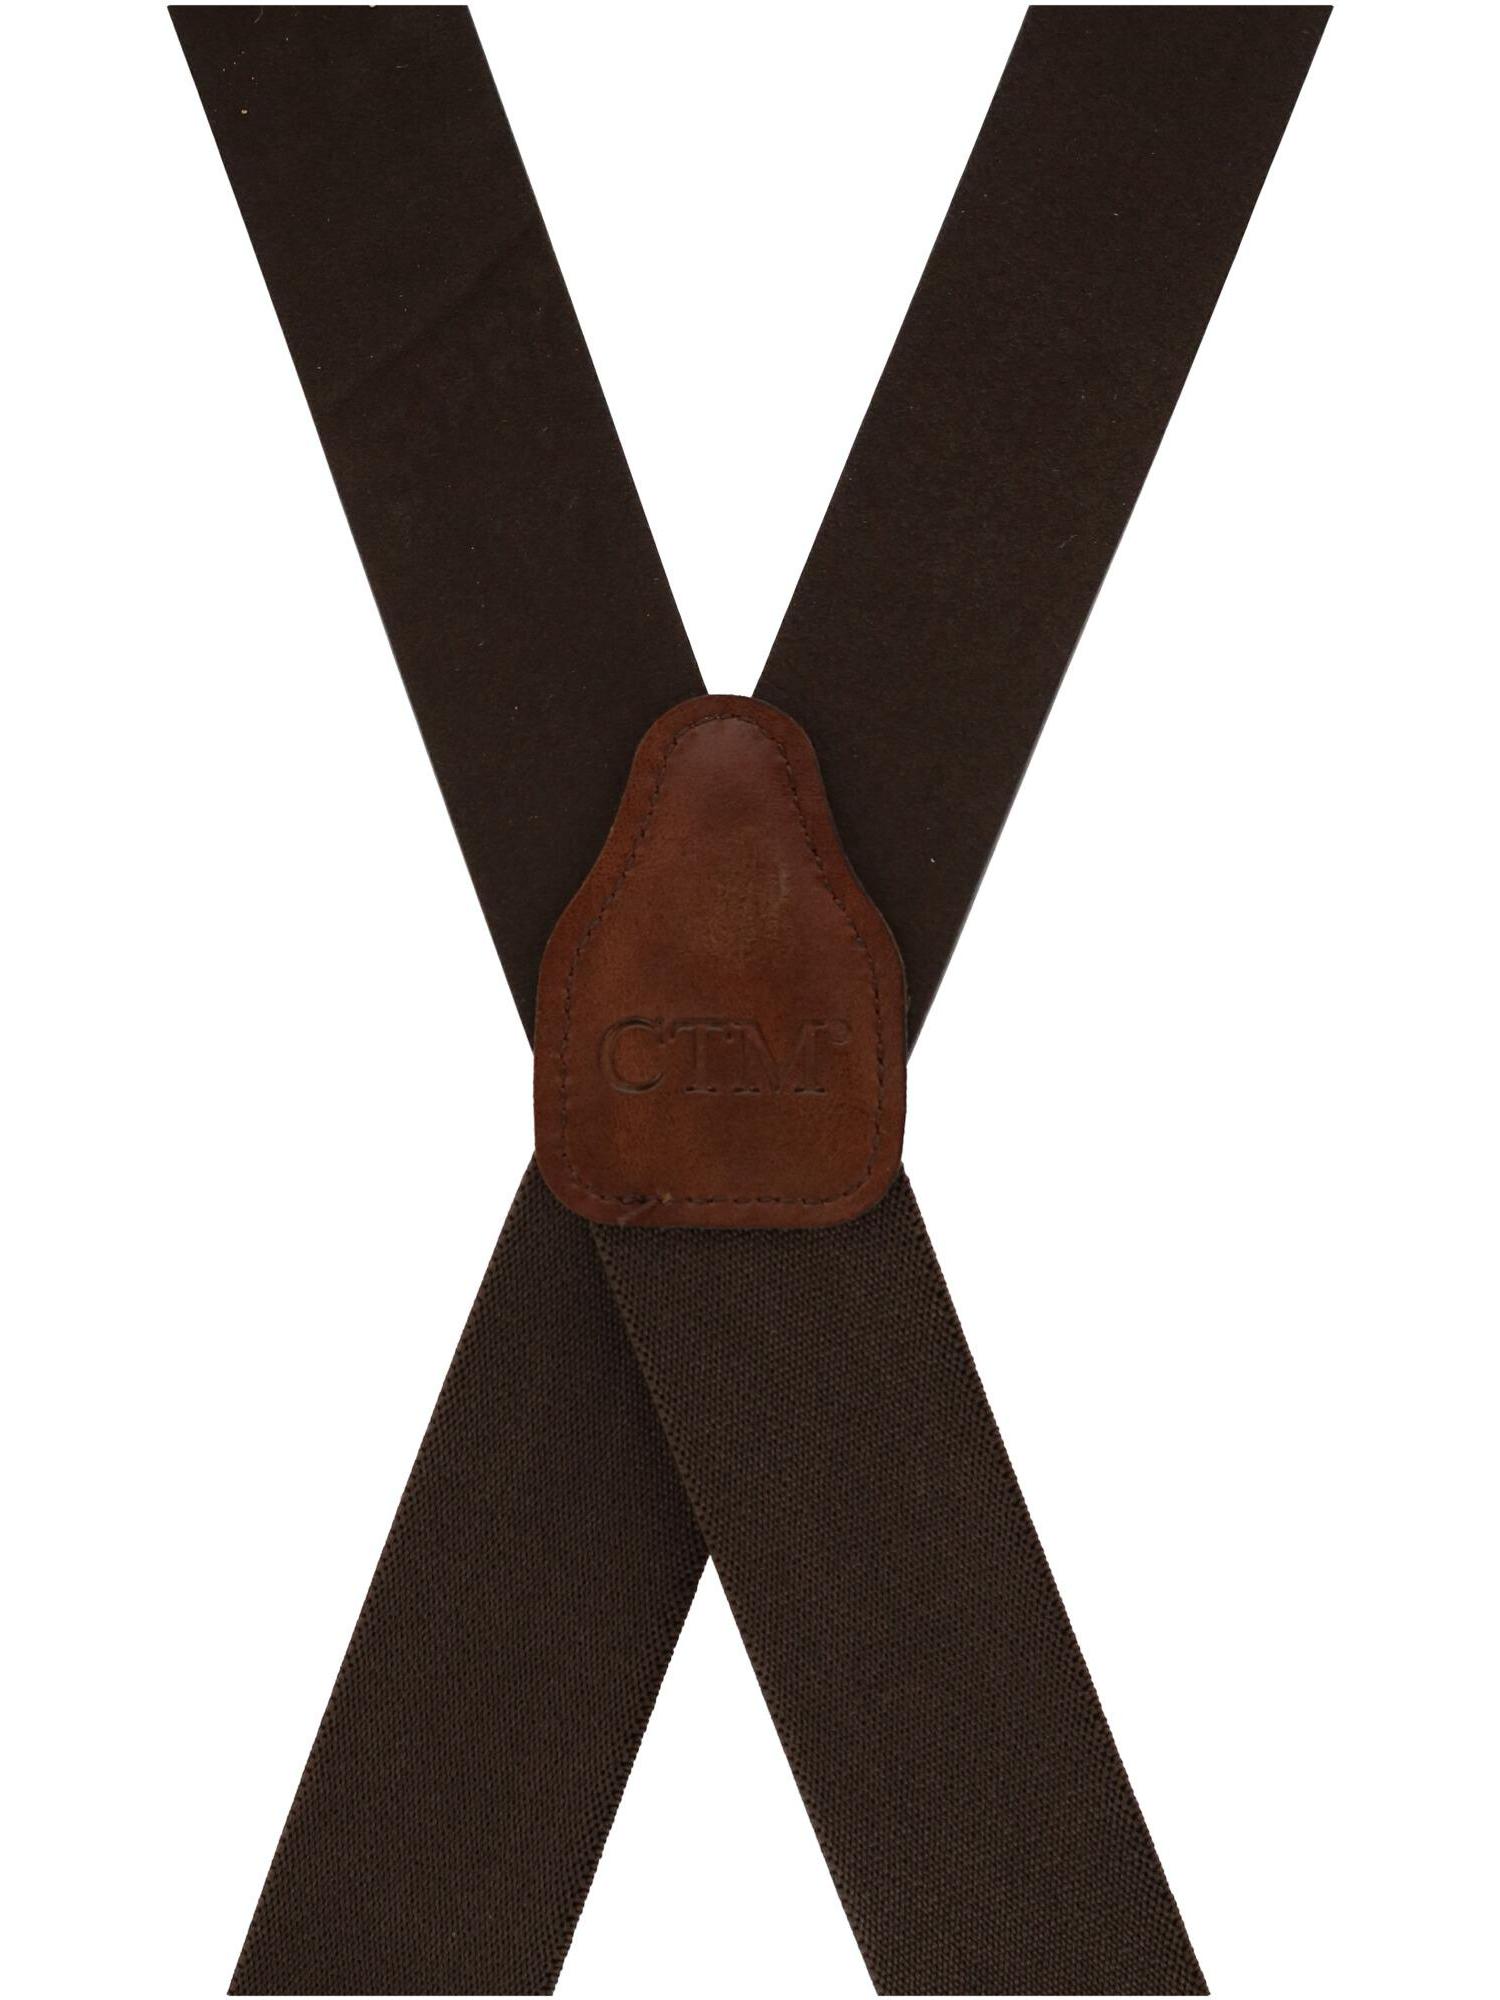 CTM  Wide Leather Suspenders with Swivel Hook Ends (Men Big & Tall) - image 2 of 4